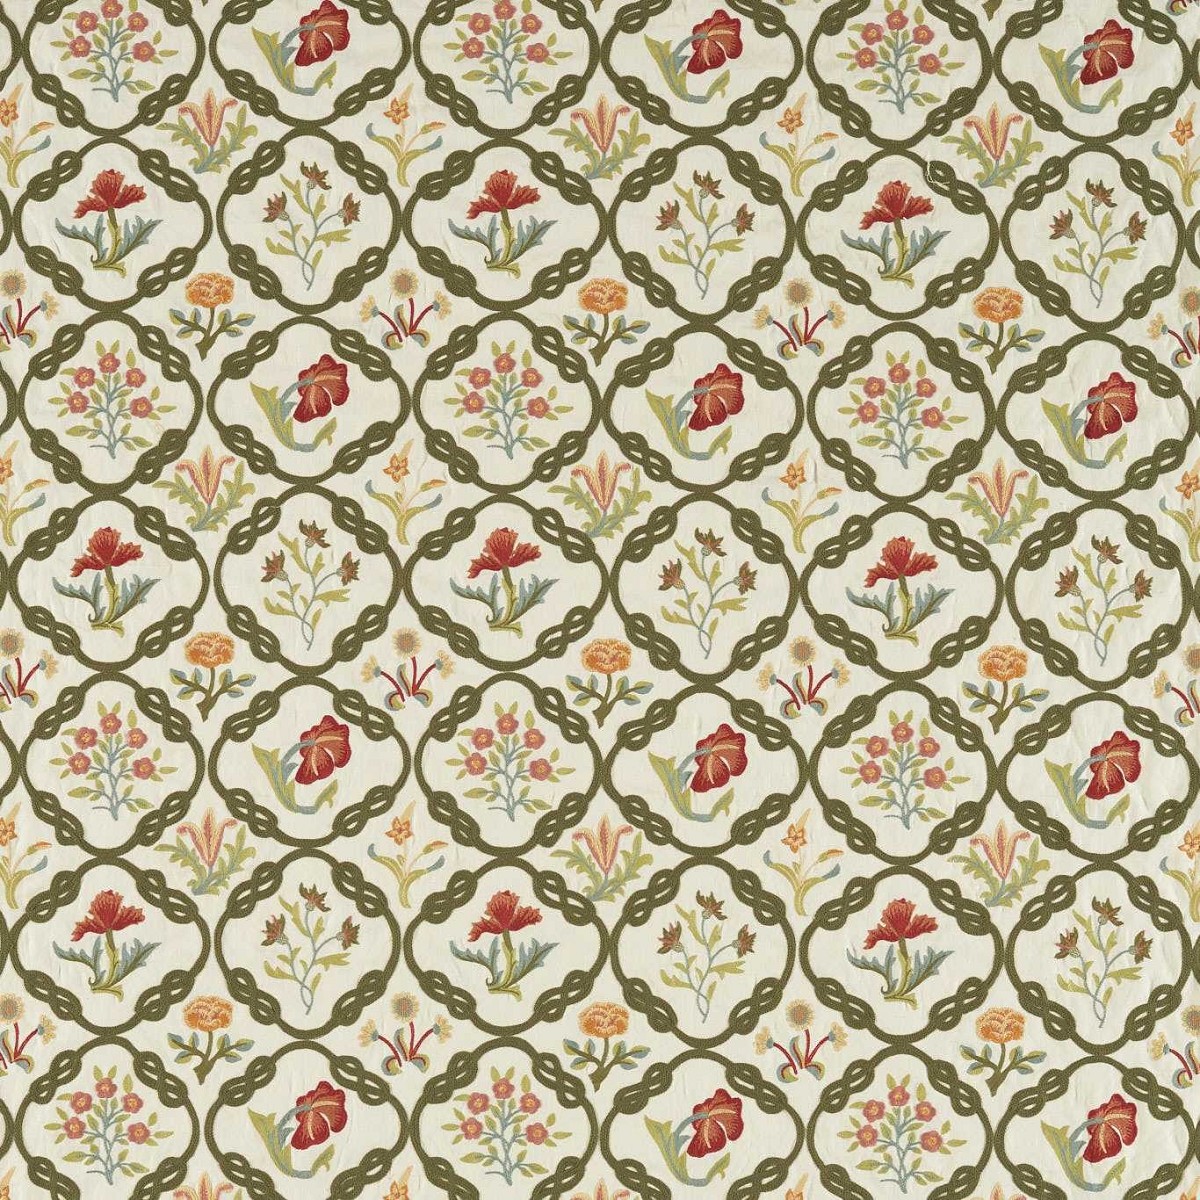 Mays Coverlet Twining Vine Fabric by William Morris & Co.